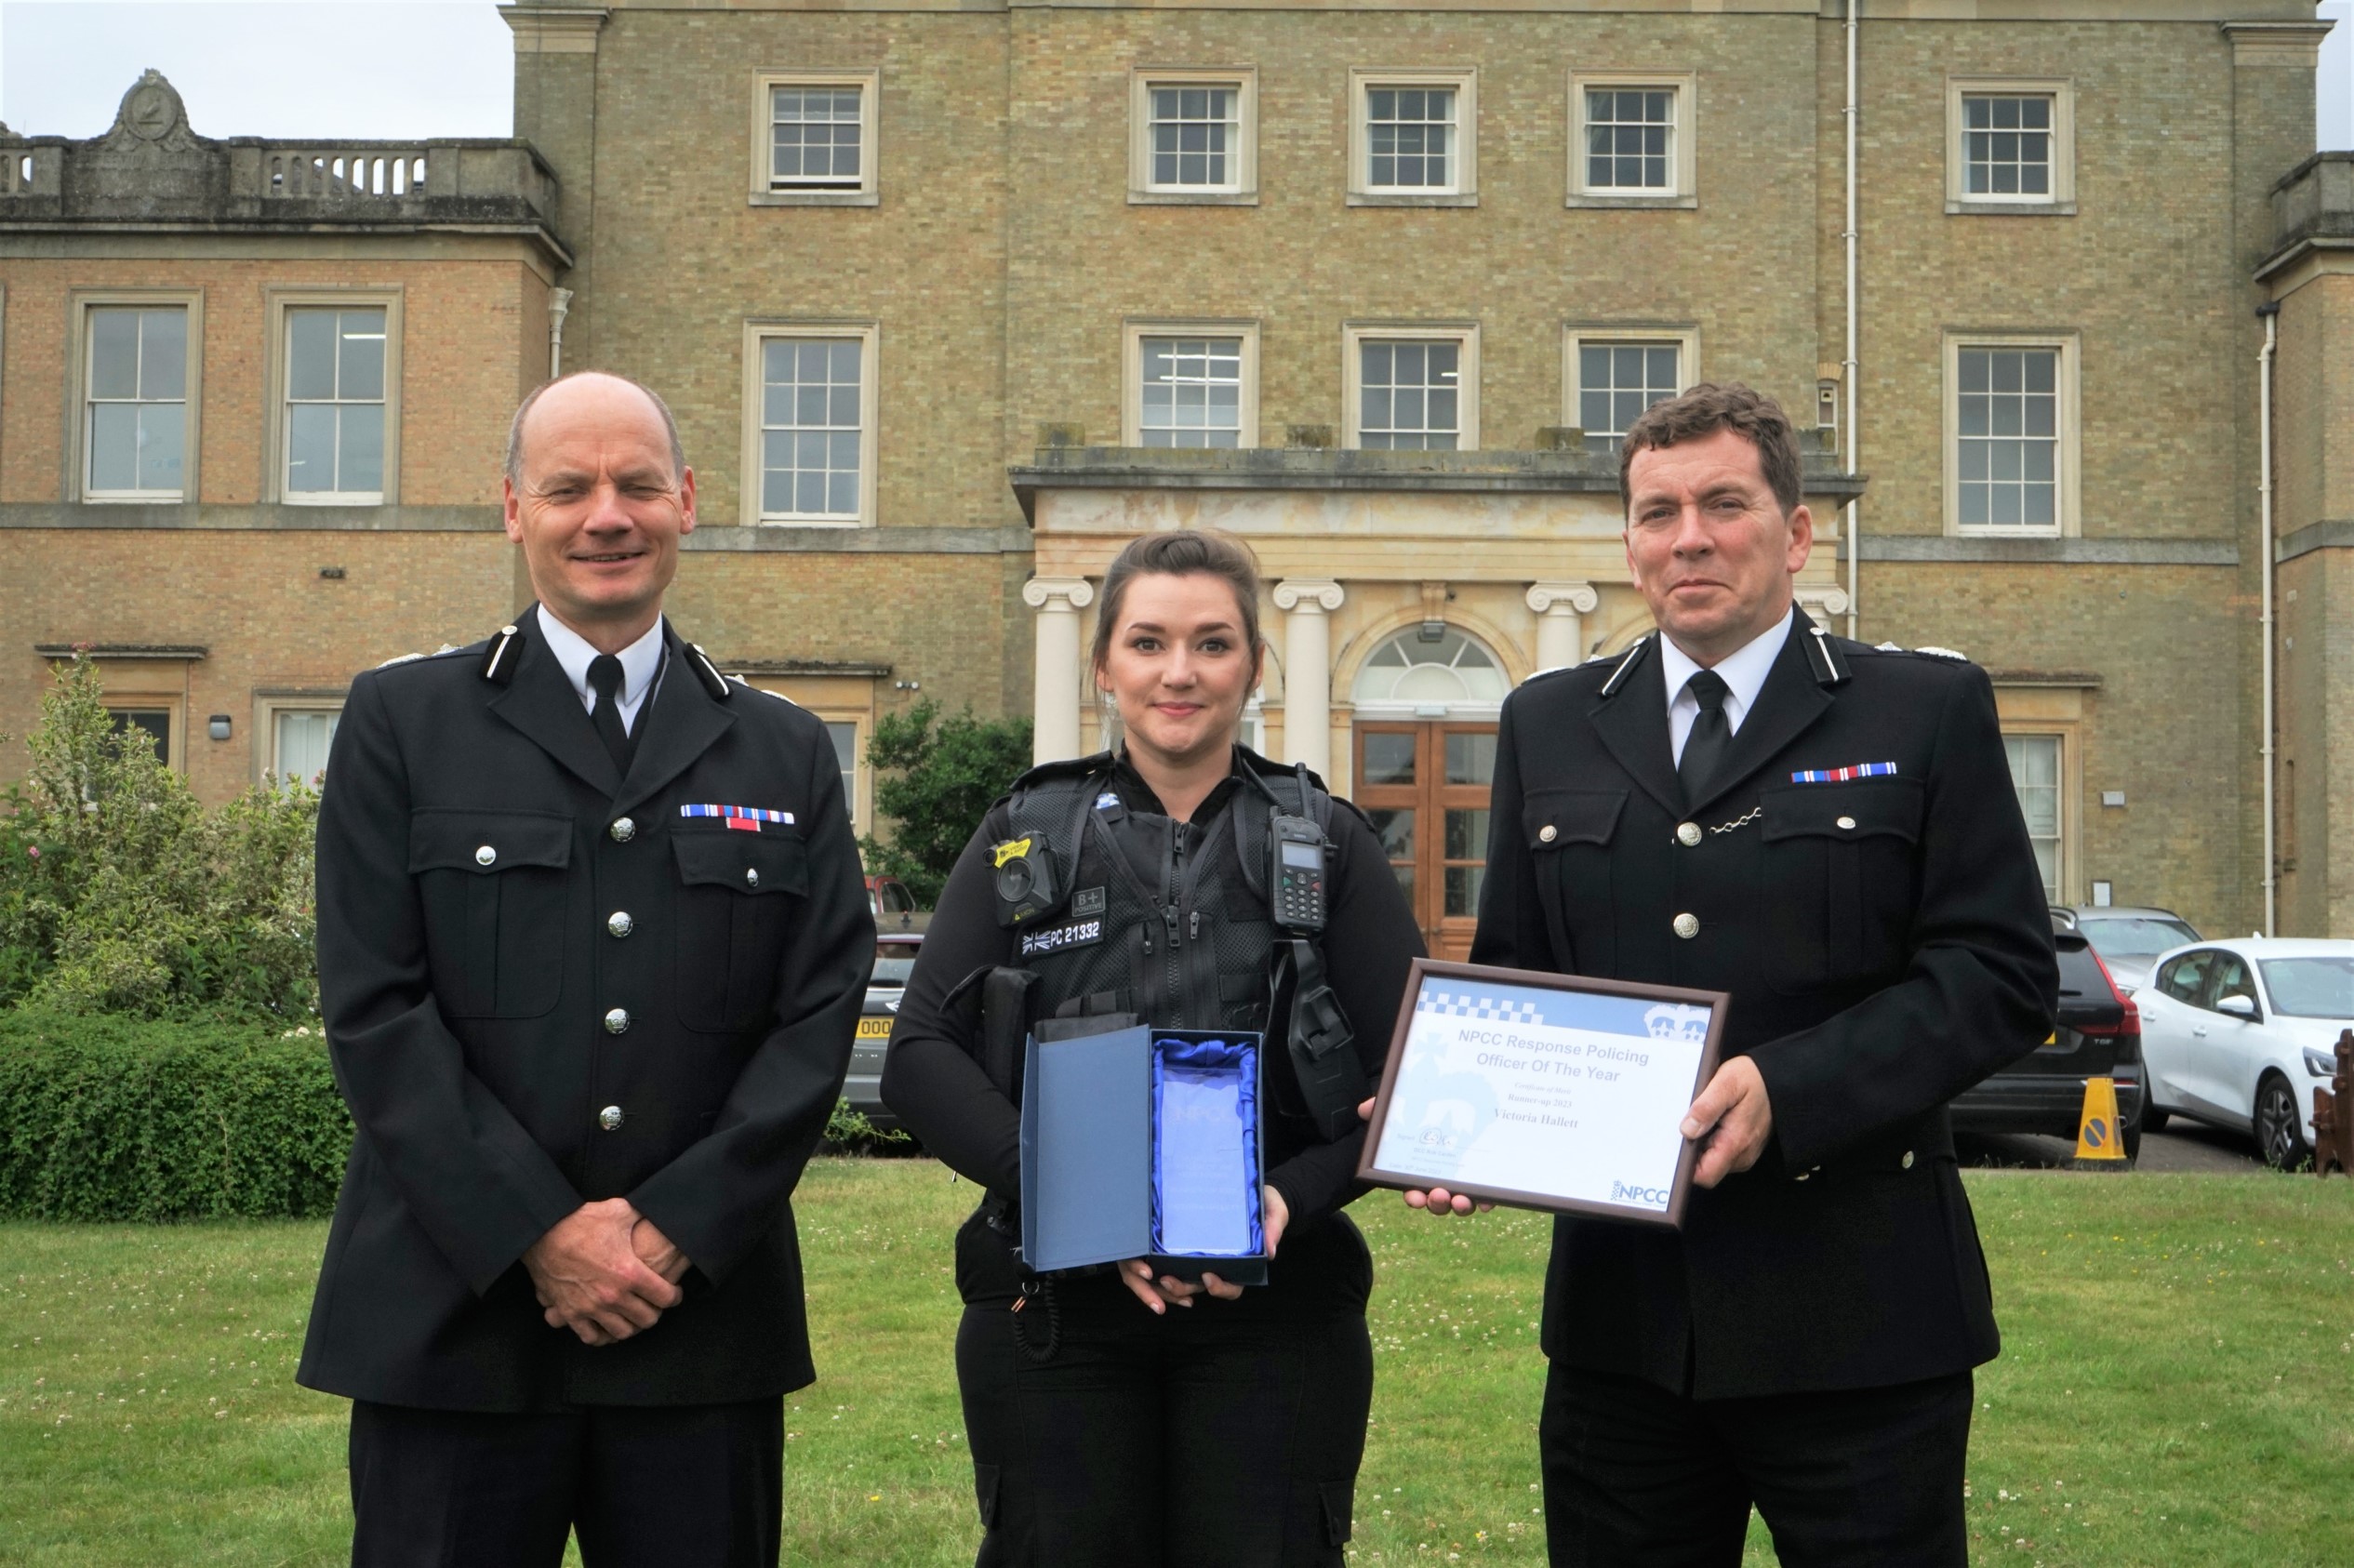 Sgt Vicky Hallett stands between two senior police officers (male) , holding her award